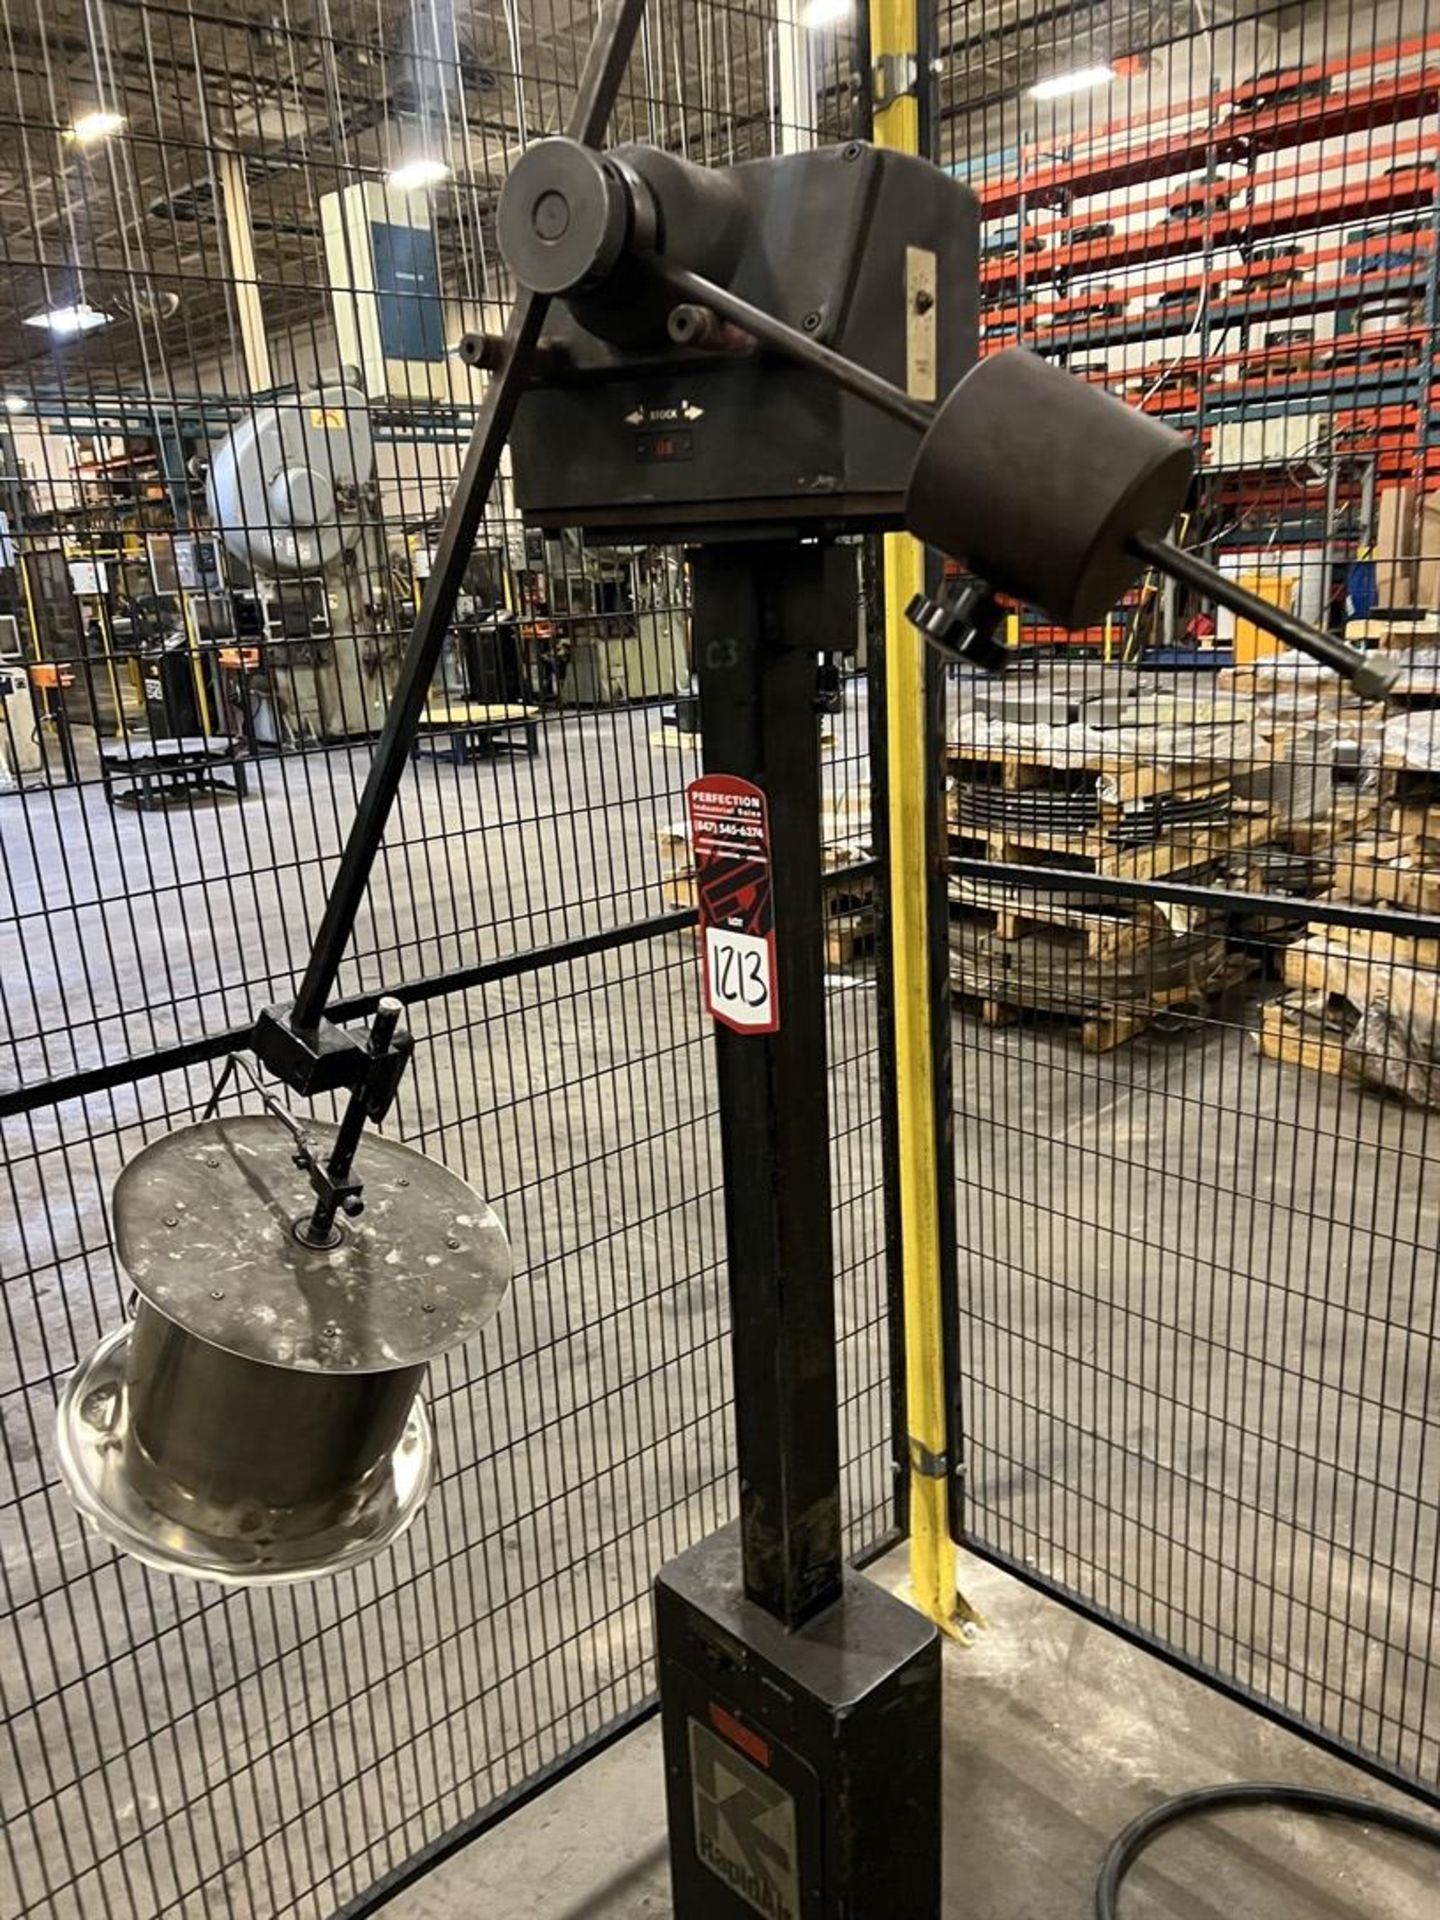 RAPID AIR PMD35 Pallet Reel, s/n 99464, 36" Max Coil Dia, 4" Max Coil Width, 3500 Lb. Max Coil - Image 3 of 4